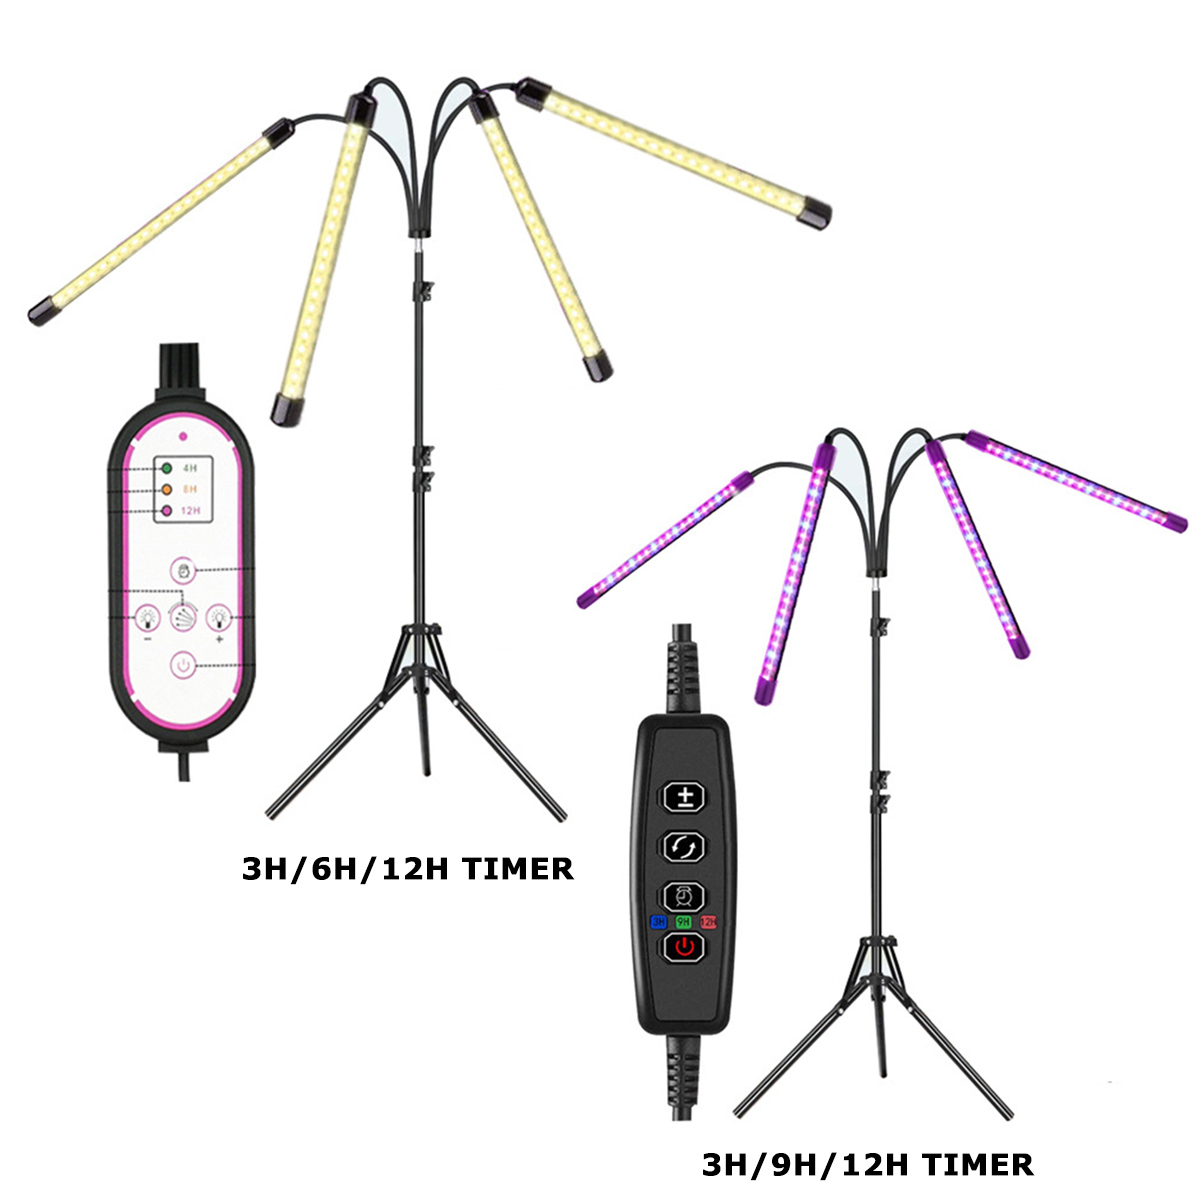 LED-Grow-Light-Tripod-Plant-Growing-Lamp-Lights-With-Tripod-For-Indoor-Plants-1836993-4